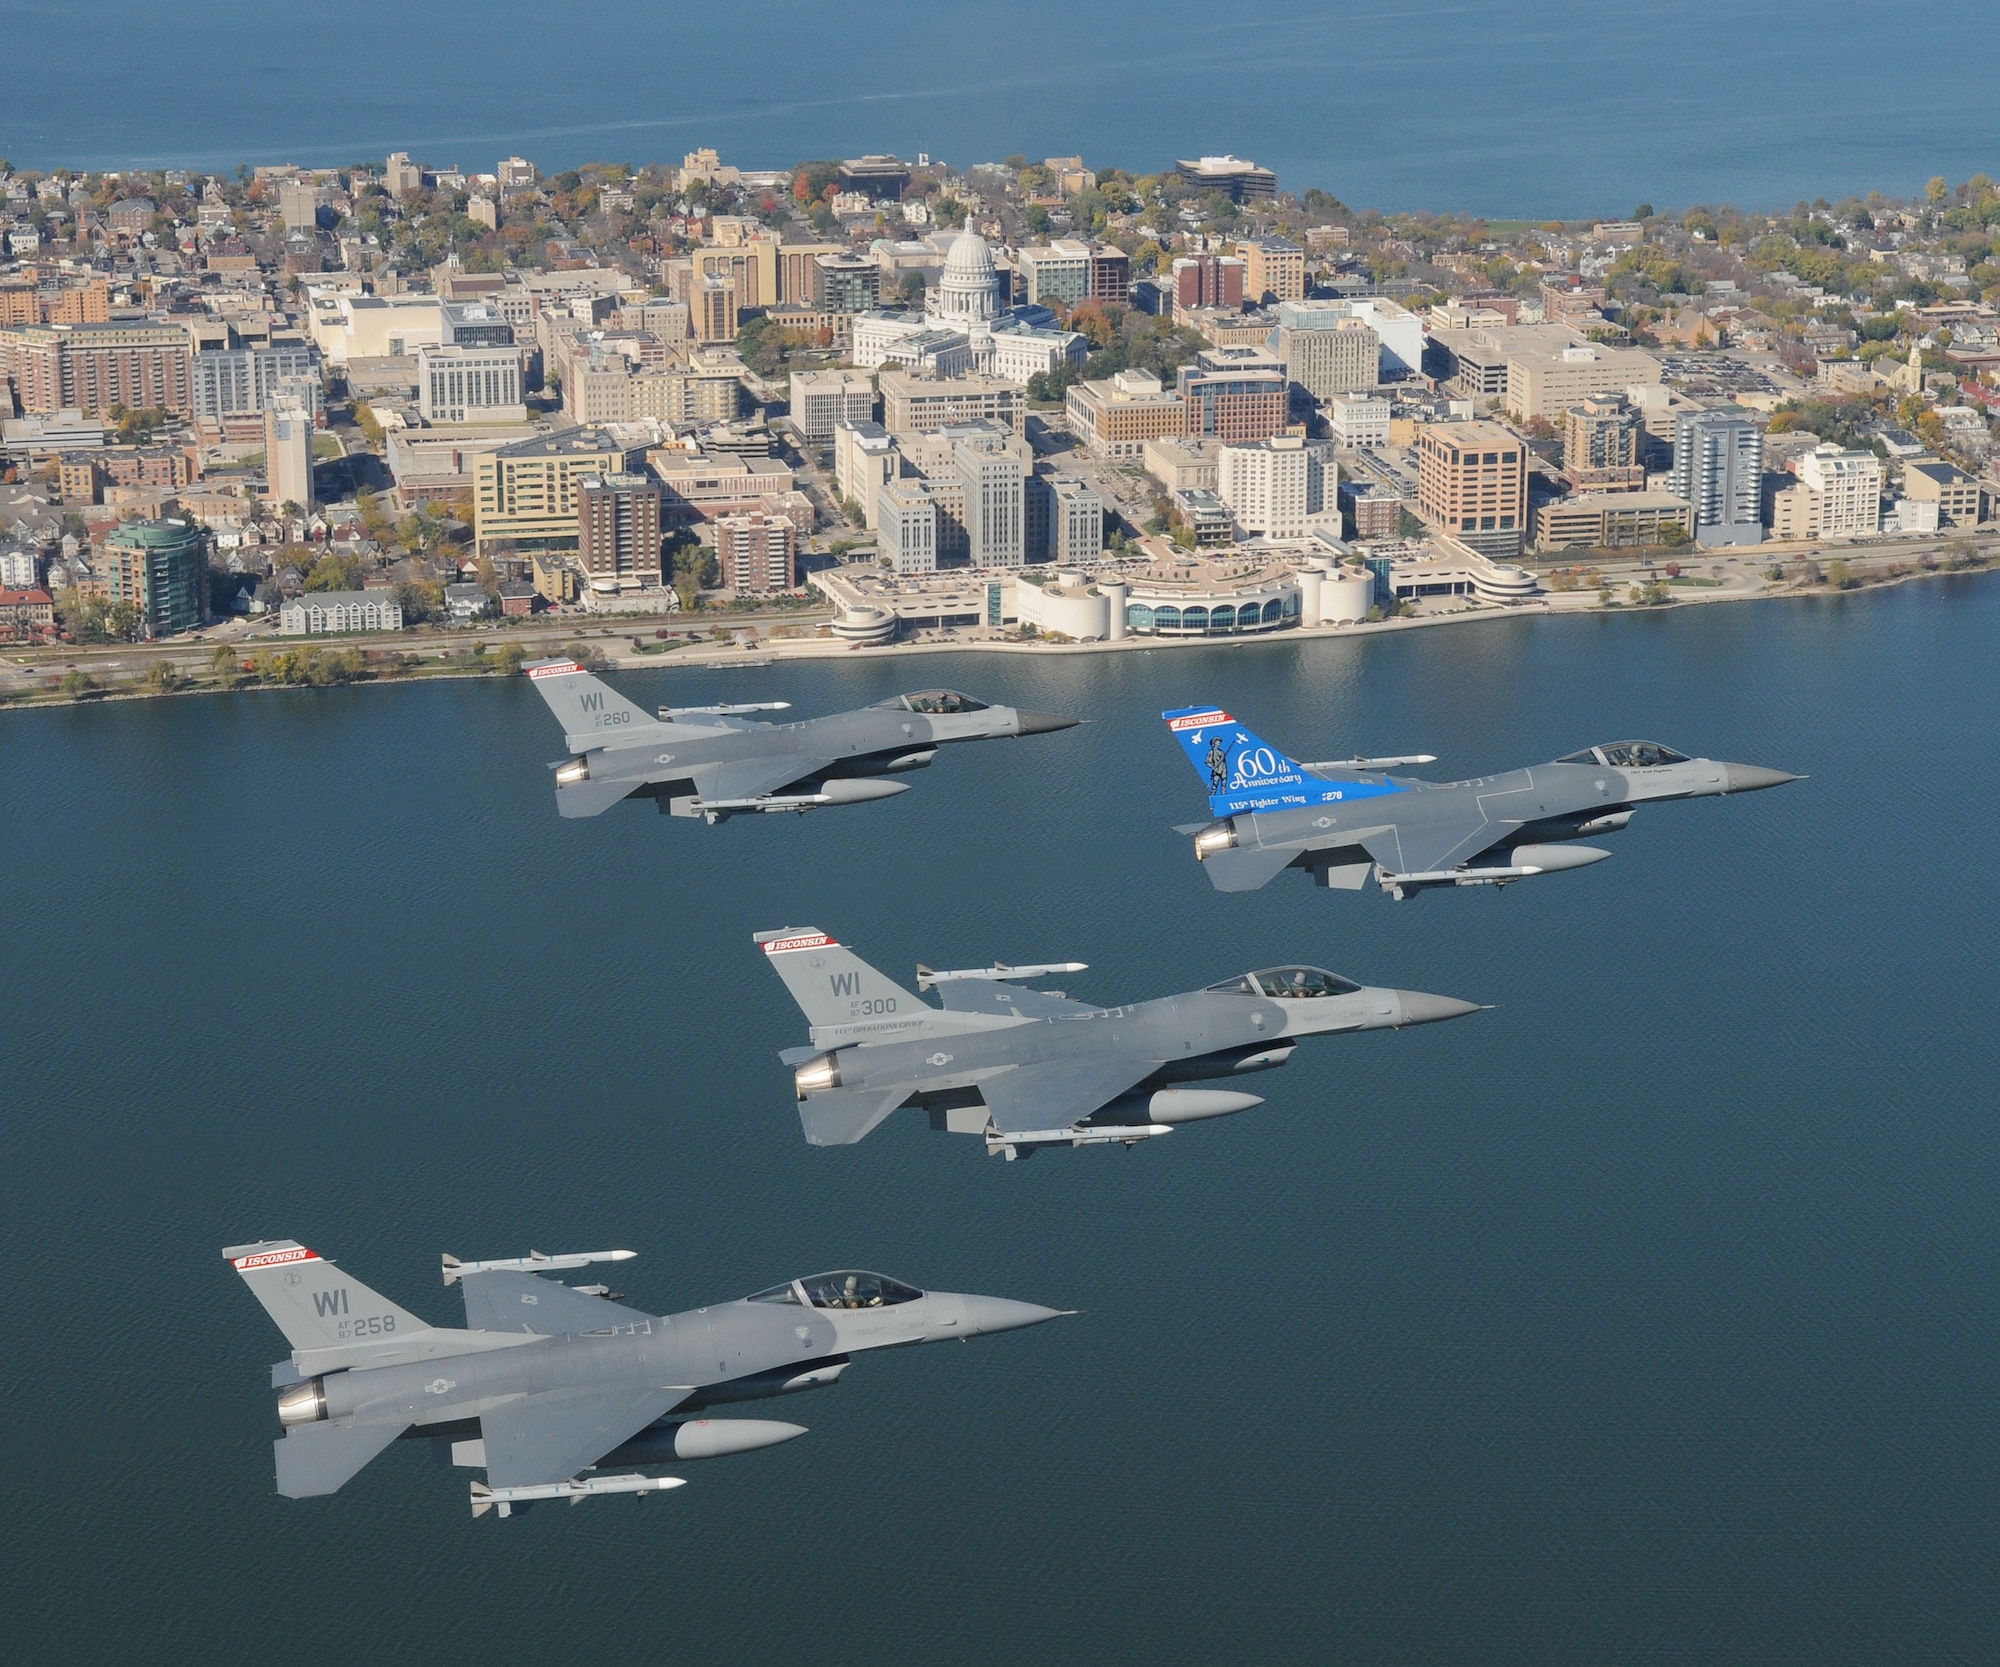 A four ship of F-16C Fighting Falcons from the 115th Fighter Wing, Wisconsin Air National Guard over Wisconsin's capital city of Madison October 18th, 2008.  In flight lead is aircraft 87-278 with a unique tail flash that was designed to celebrate the unit's 60th Anniversary.  (U.S. Air Force Photo by Master Sgt. Paul Gorman)  (RELEASED)